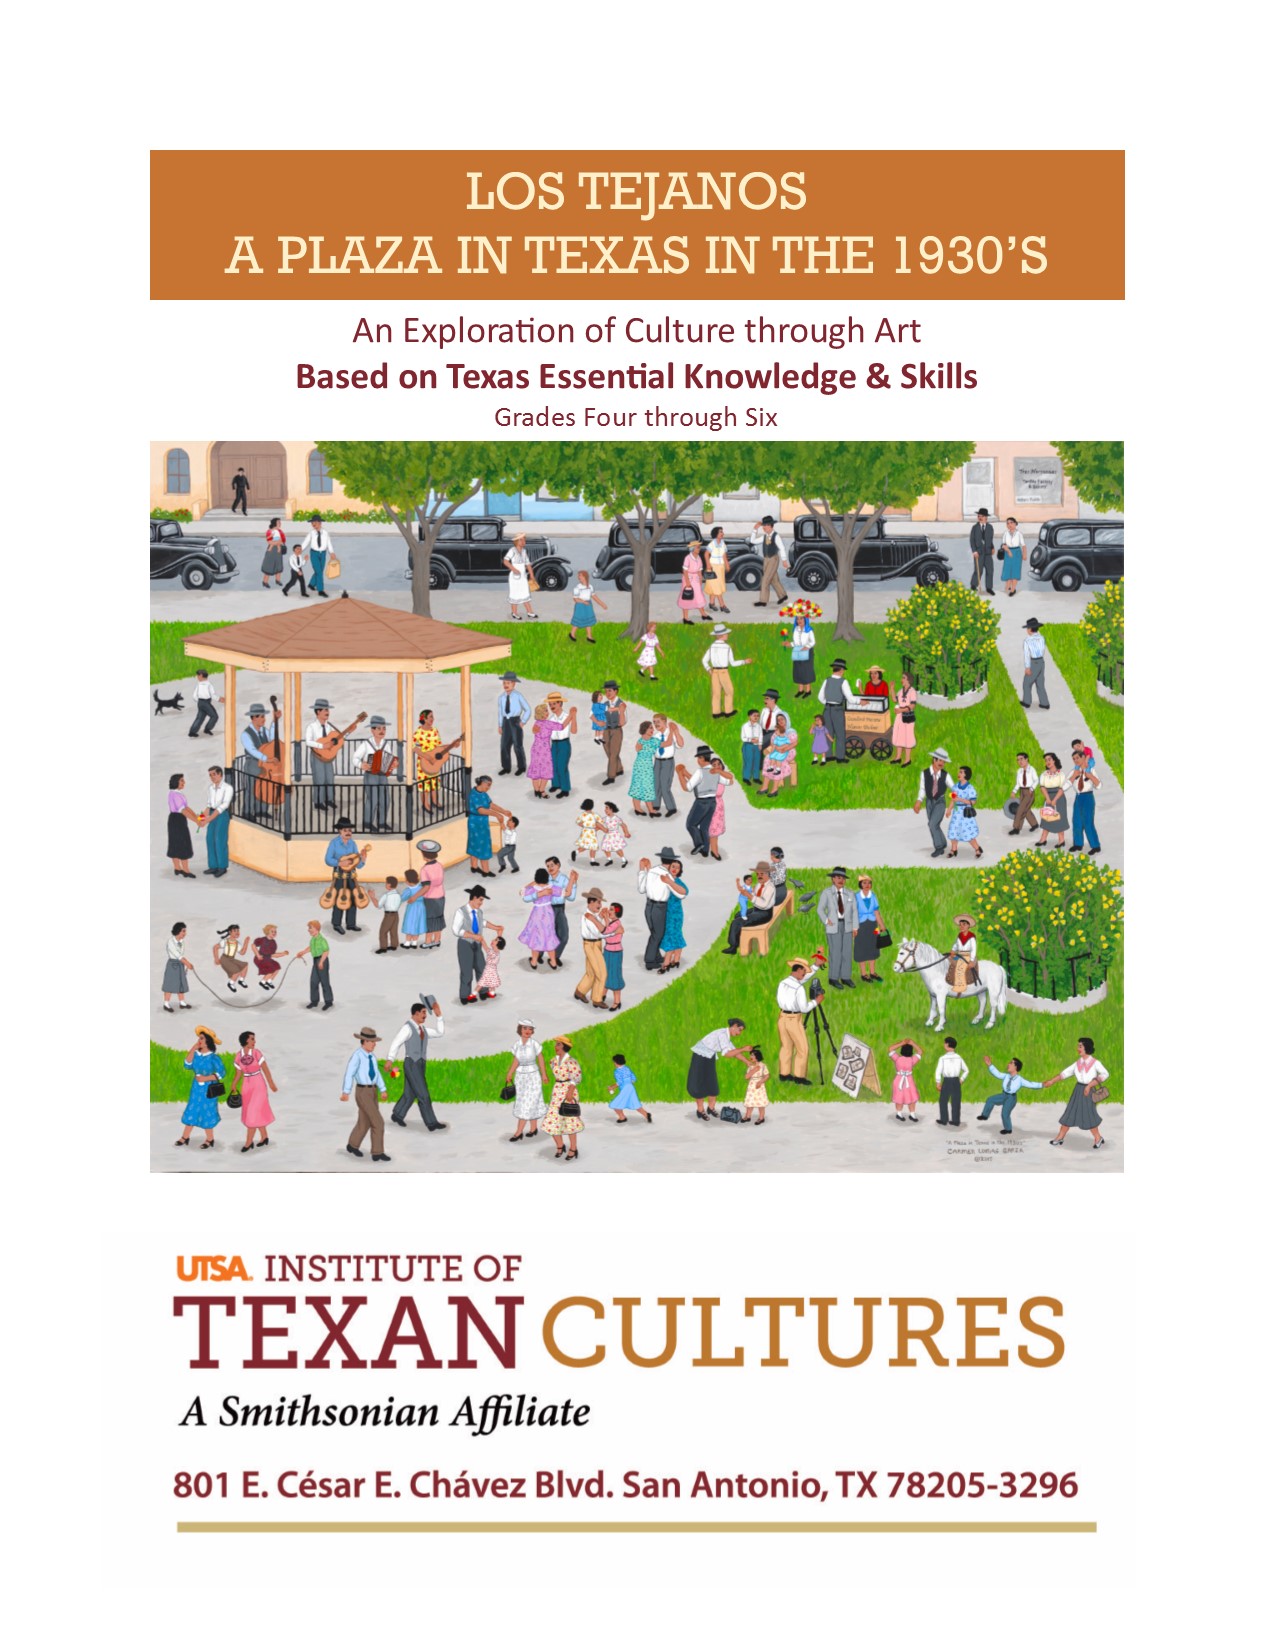 A Plaza in Texas in the 1930s: An Exploration of Culture through Art | UTSA Institute Of Texan Cultures